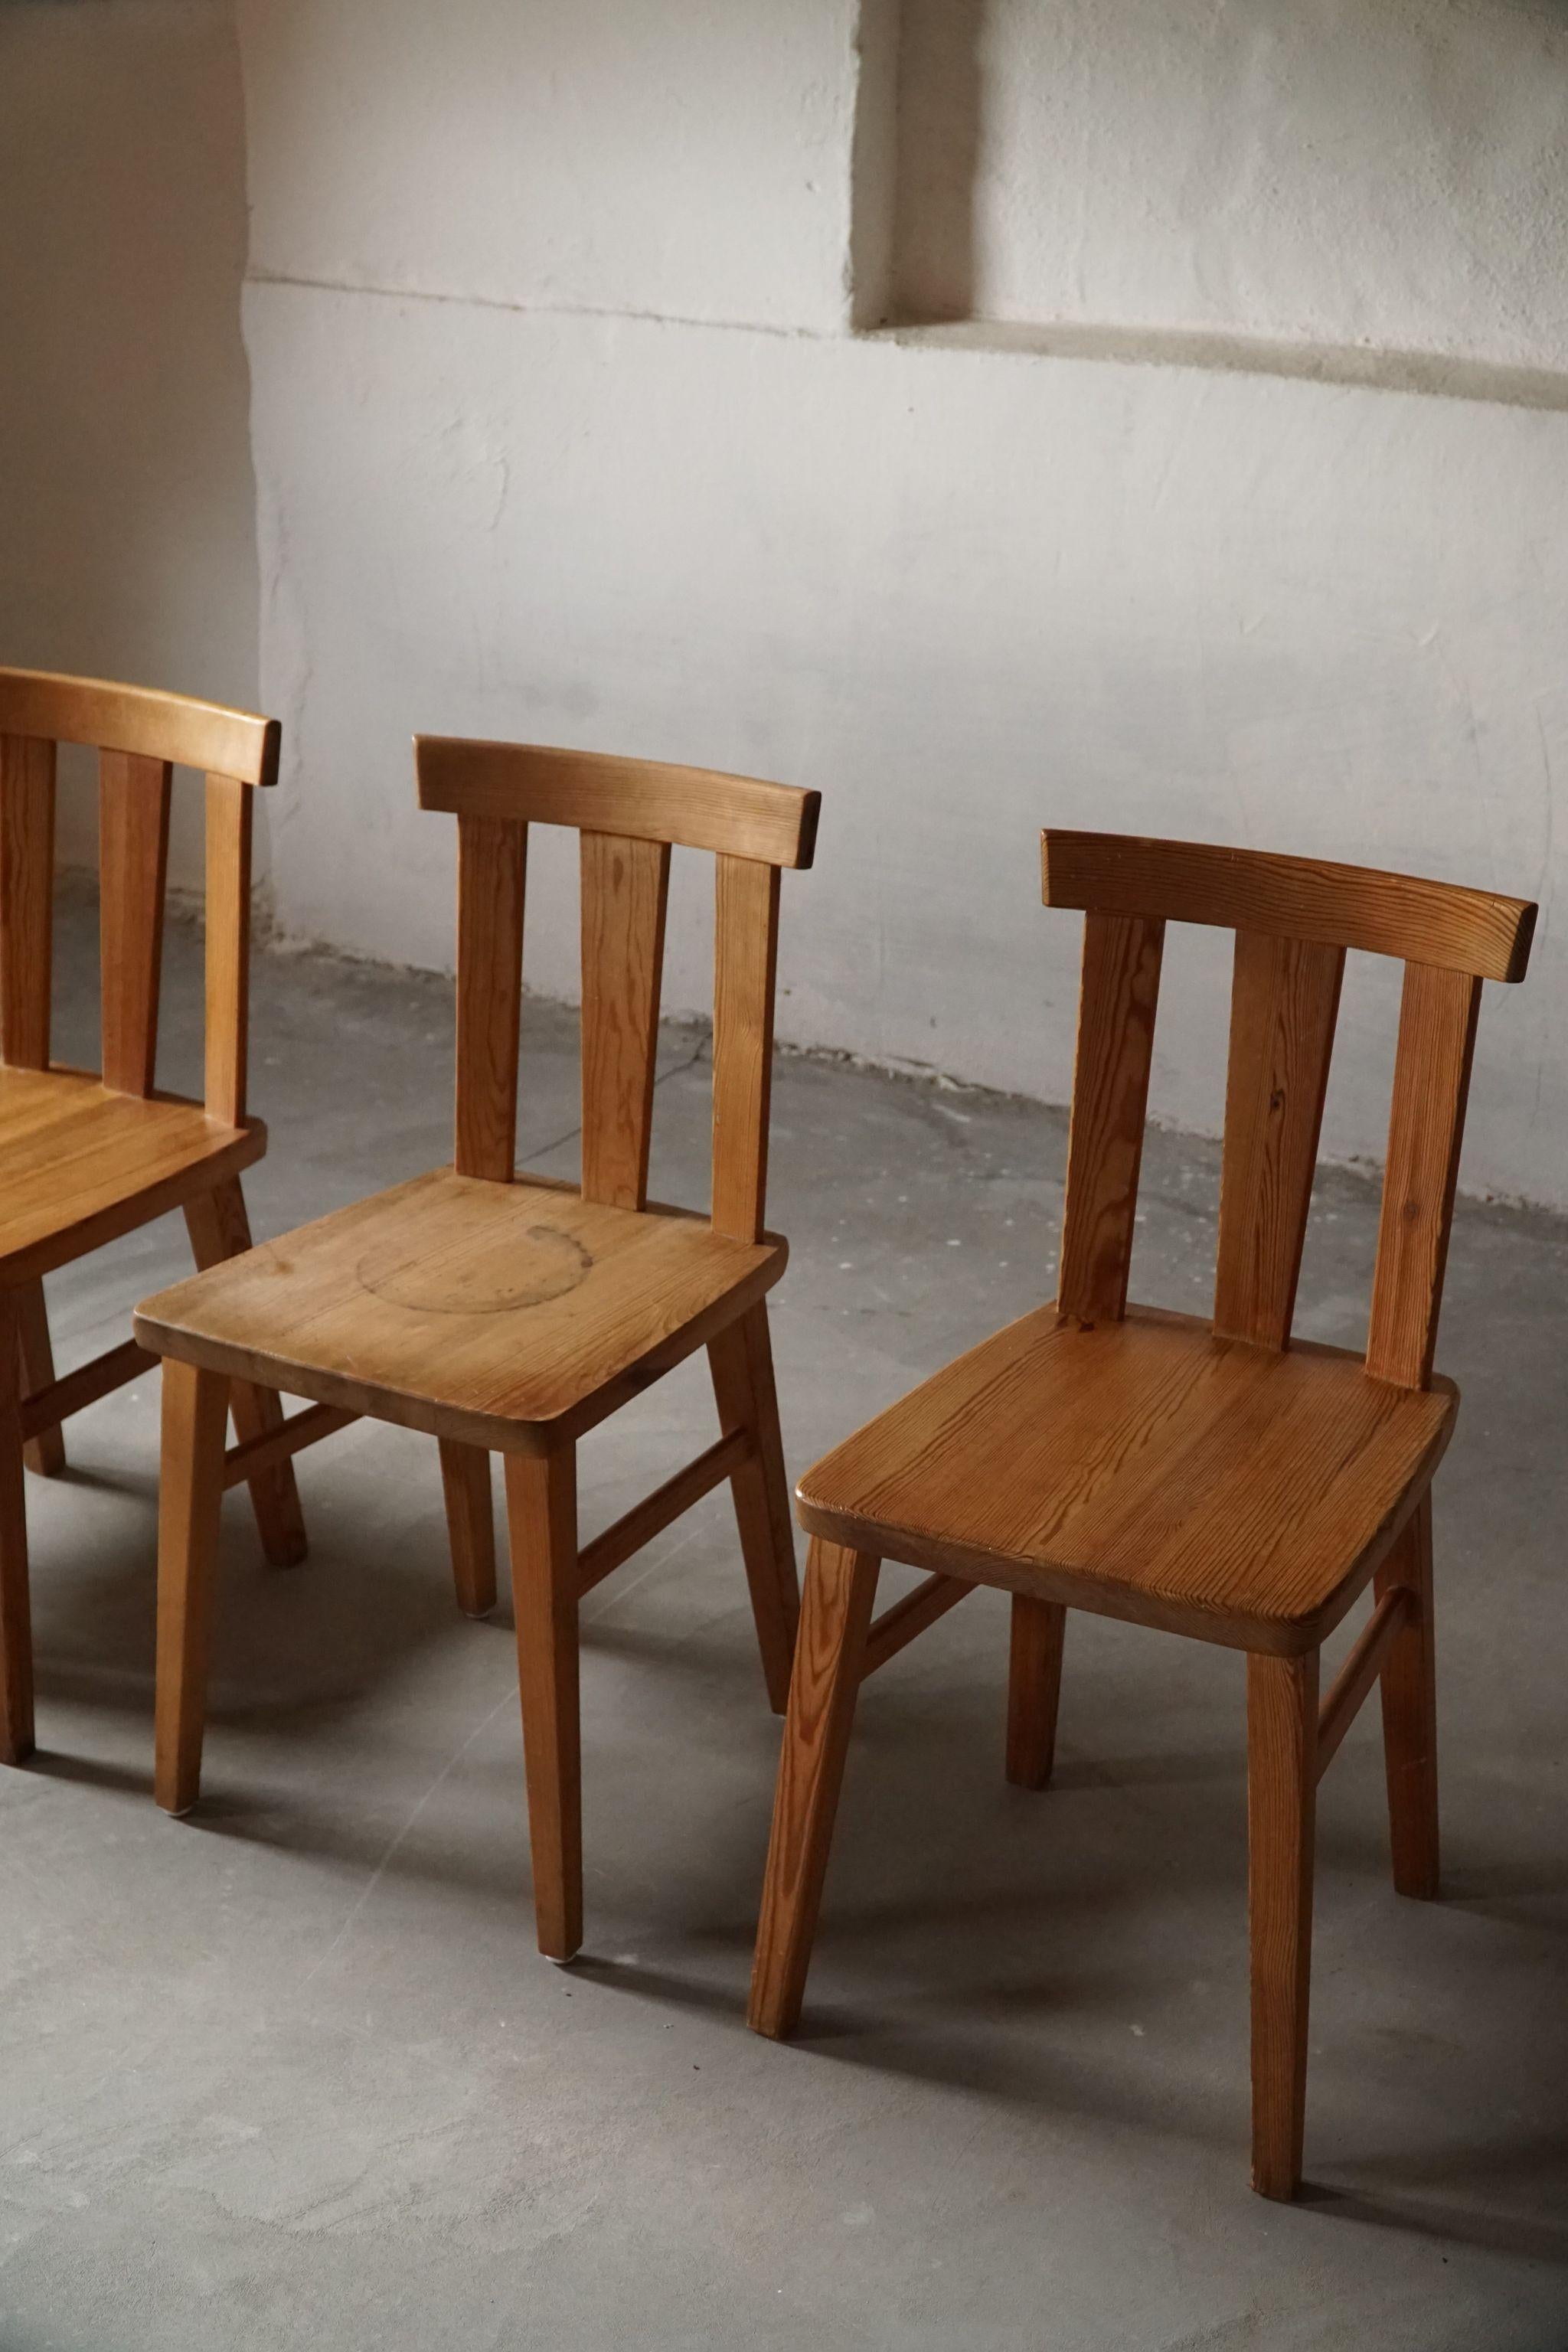 Set of 4 Swedish Modern Chairs in Solid Pine, Axel Einar Hjorth Style, 1930s For Sale 5